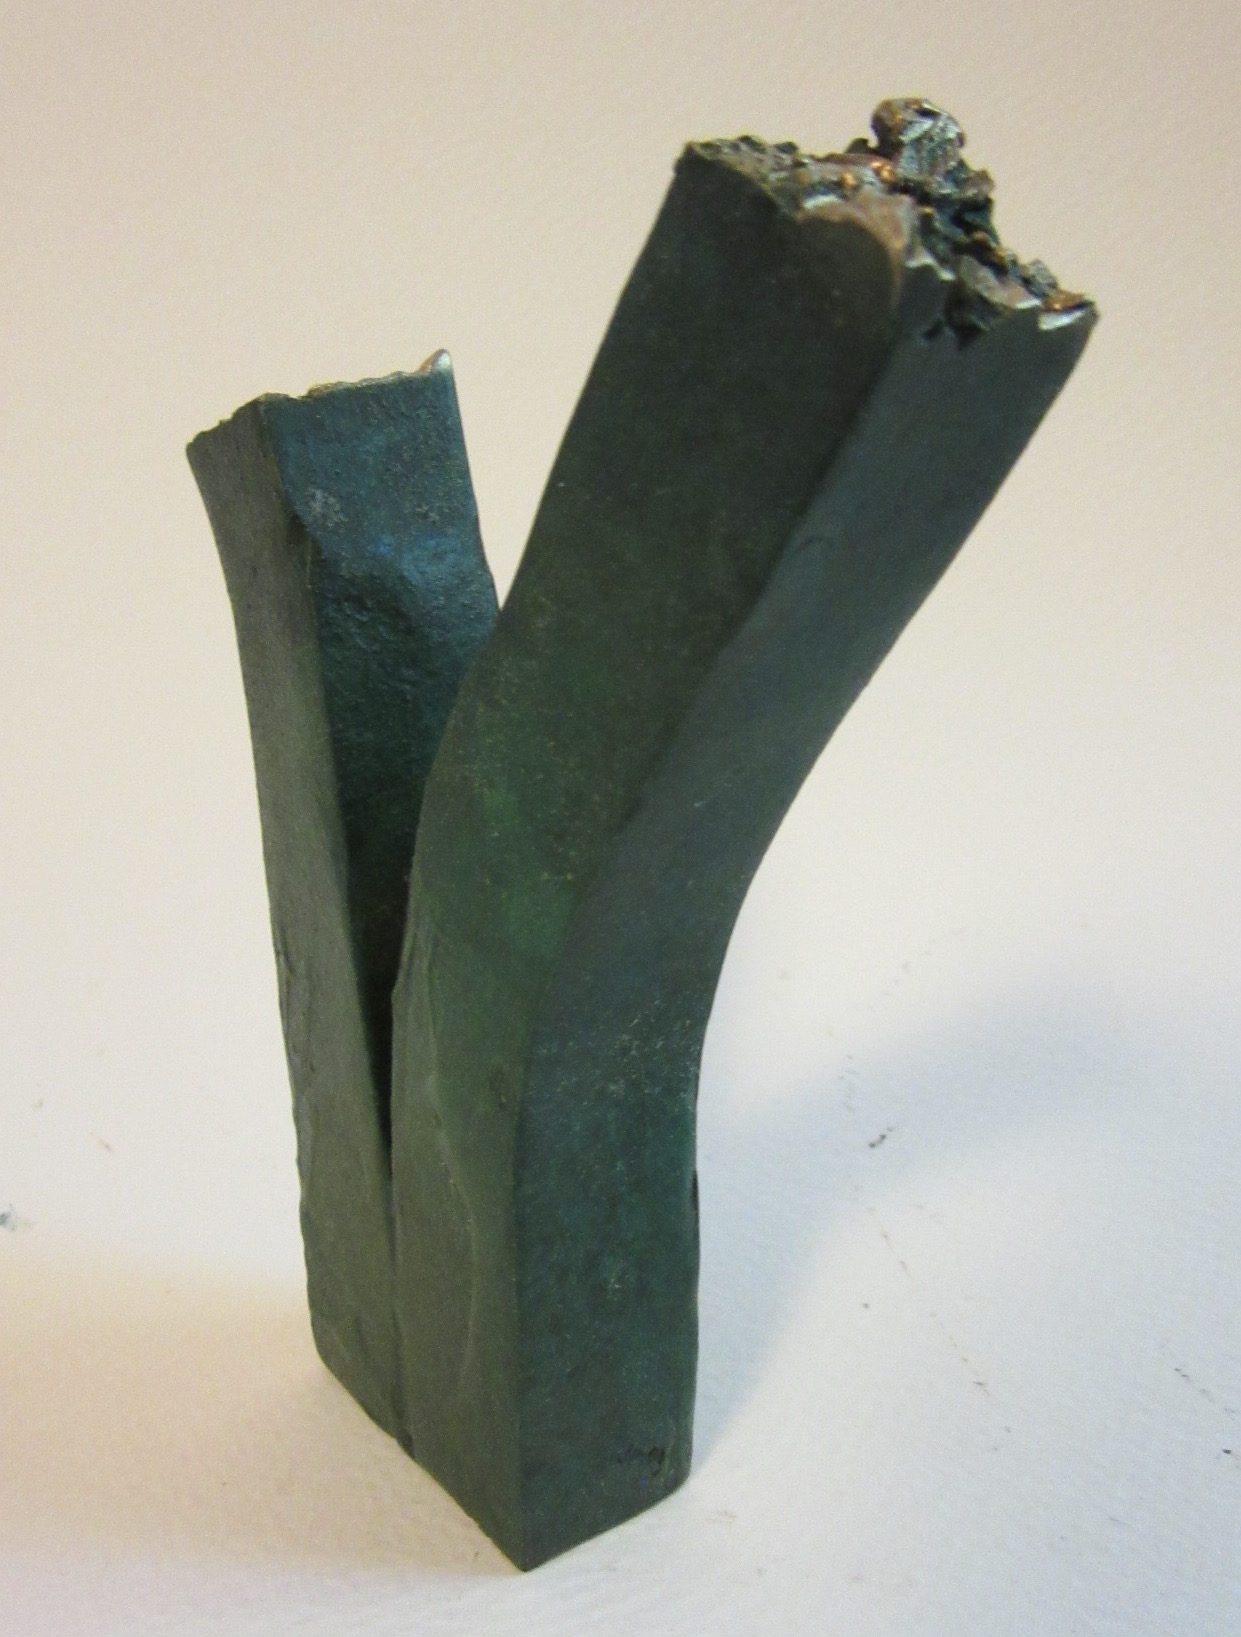   Untitled , bronze 4.5" x 1.5" Gifted 